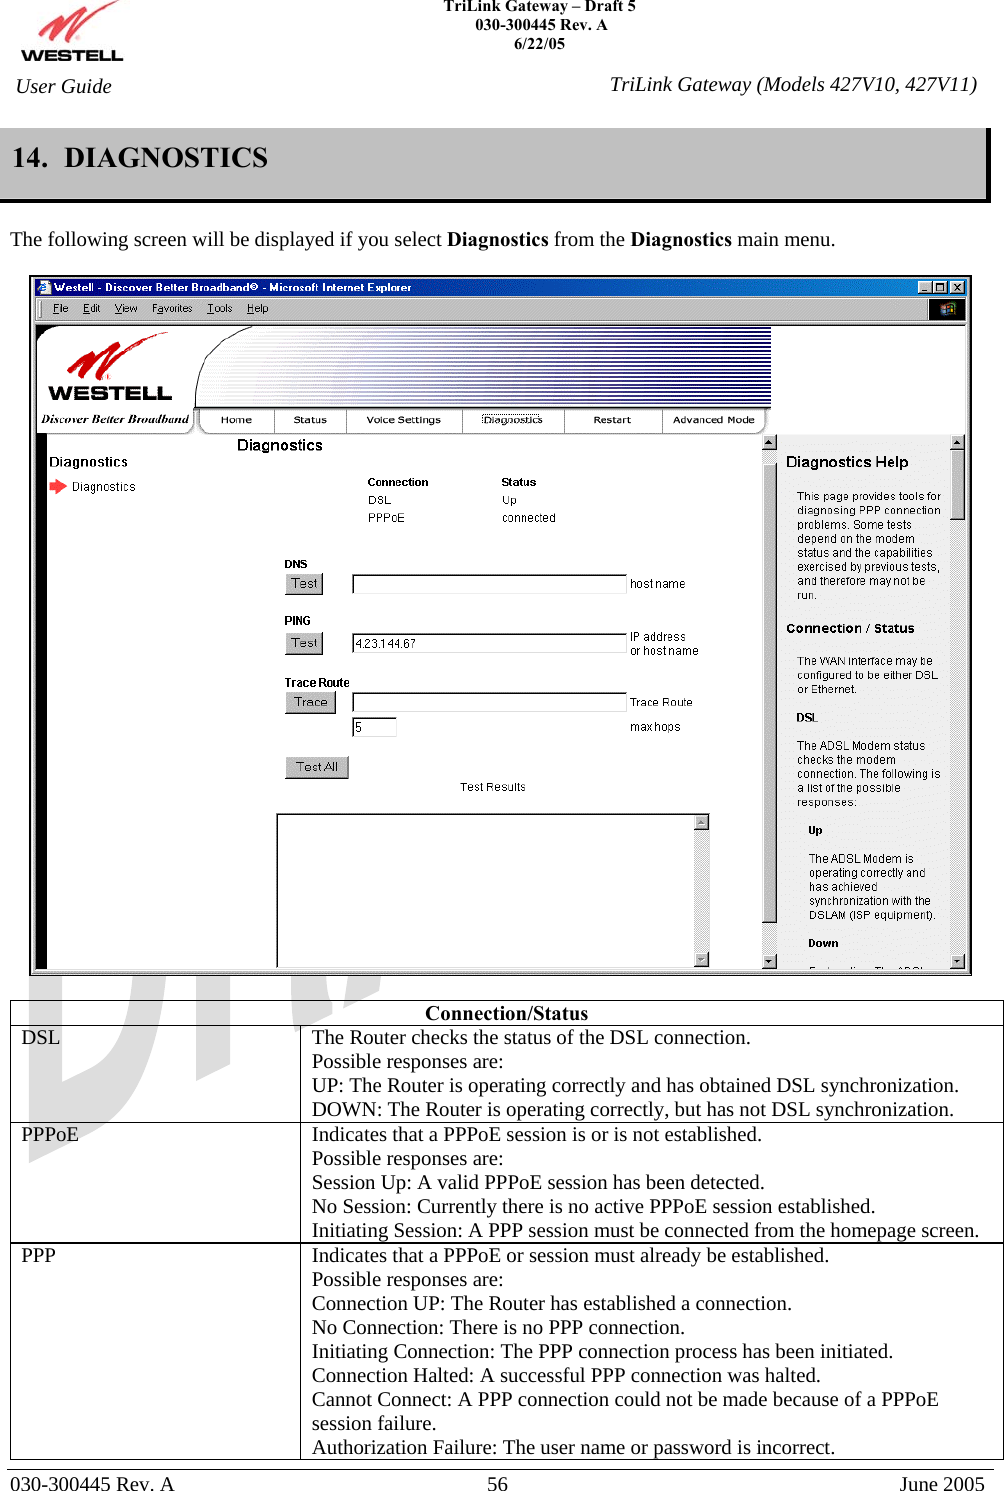    TriLink Gateway – Draft 5   030-300445 Rev. A 6/22/05   030-300445 Rev. A  56  June 2005  User Guide  TriLink Gateway (Models 427V10, 427V11)14.  DIAGNOSTICS  The following screen will be displayed if you select Diagnostics from the Diagnostics main menu.    Connection/Status DSL  The Router checks the status of the DSL connection.  Possible responses are: UP: The Router is operating correctly and has obtained DSL synchronization. DOWN: The Router is operating correctly, but has not DSL synchronization.  PPPoE  Indicates that a PPPoE session is or is not established.  Possible responses are: Session Up: A valid PPPoE session has been detected. No Session: Currently there is no active PPPoE session established. Initiating Session: A PPP session must be connected from the homepage screen.  PPP  Indicates that a PPPoE or session must already be established. Possible responses are: Connection UP: The Router has established a connection. No Connection: There is no PPP connection. Initiating Connection: The PPP connection process has been initiated. Connection Halted: A successful PPP connection was halted. Cannot Connect: A PPP connection could not be made because of a PPPoE session failure. Authorization Failure: The user name or password is incorrect. 